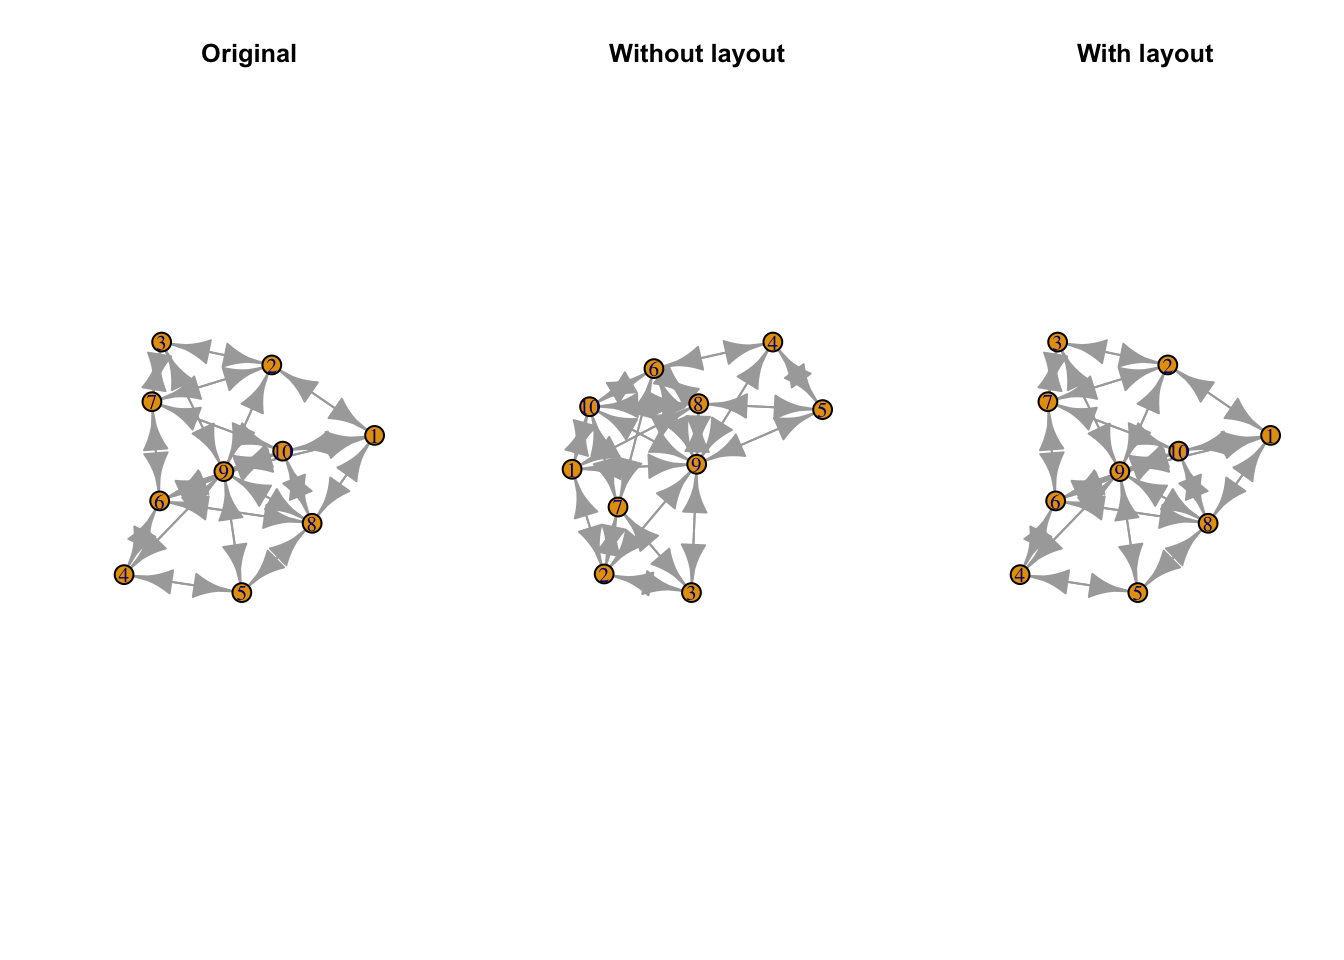 Using vertex coordinates preserves the exact layout of a network.